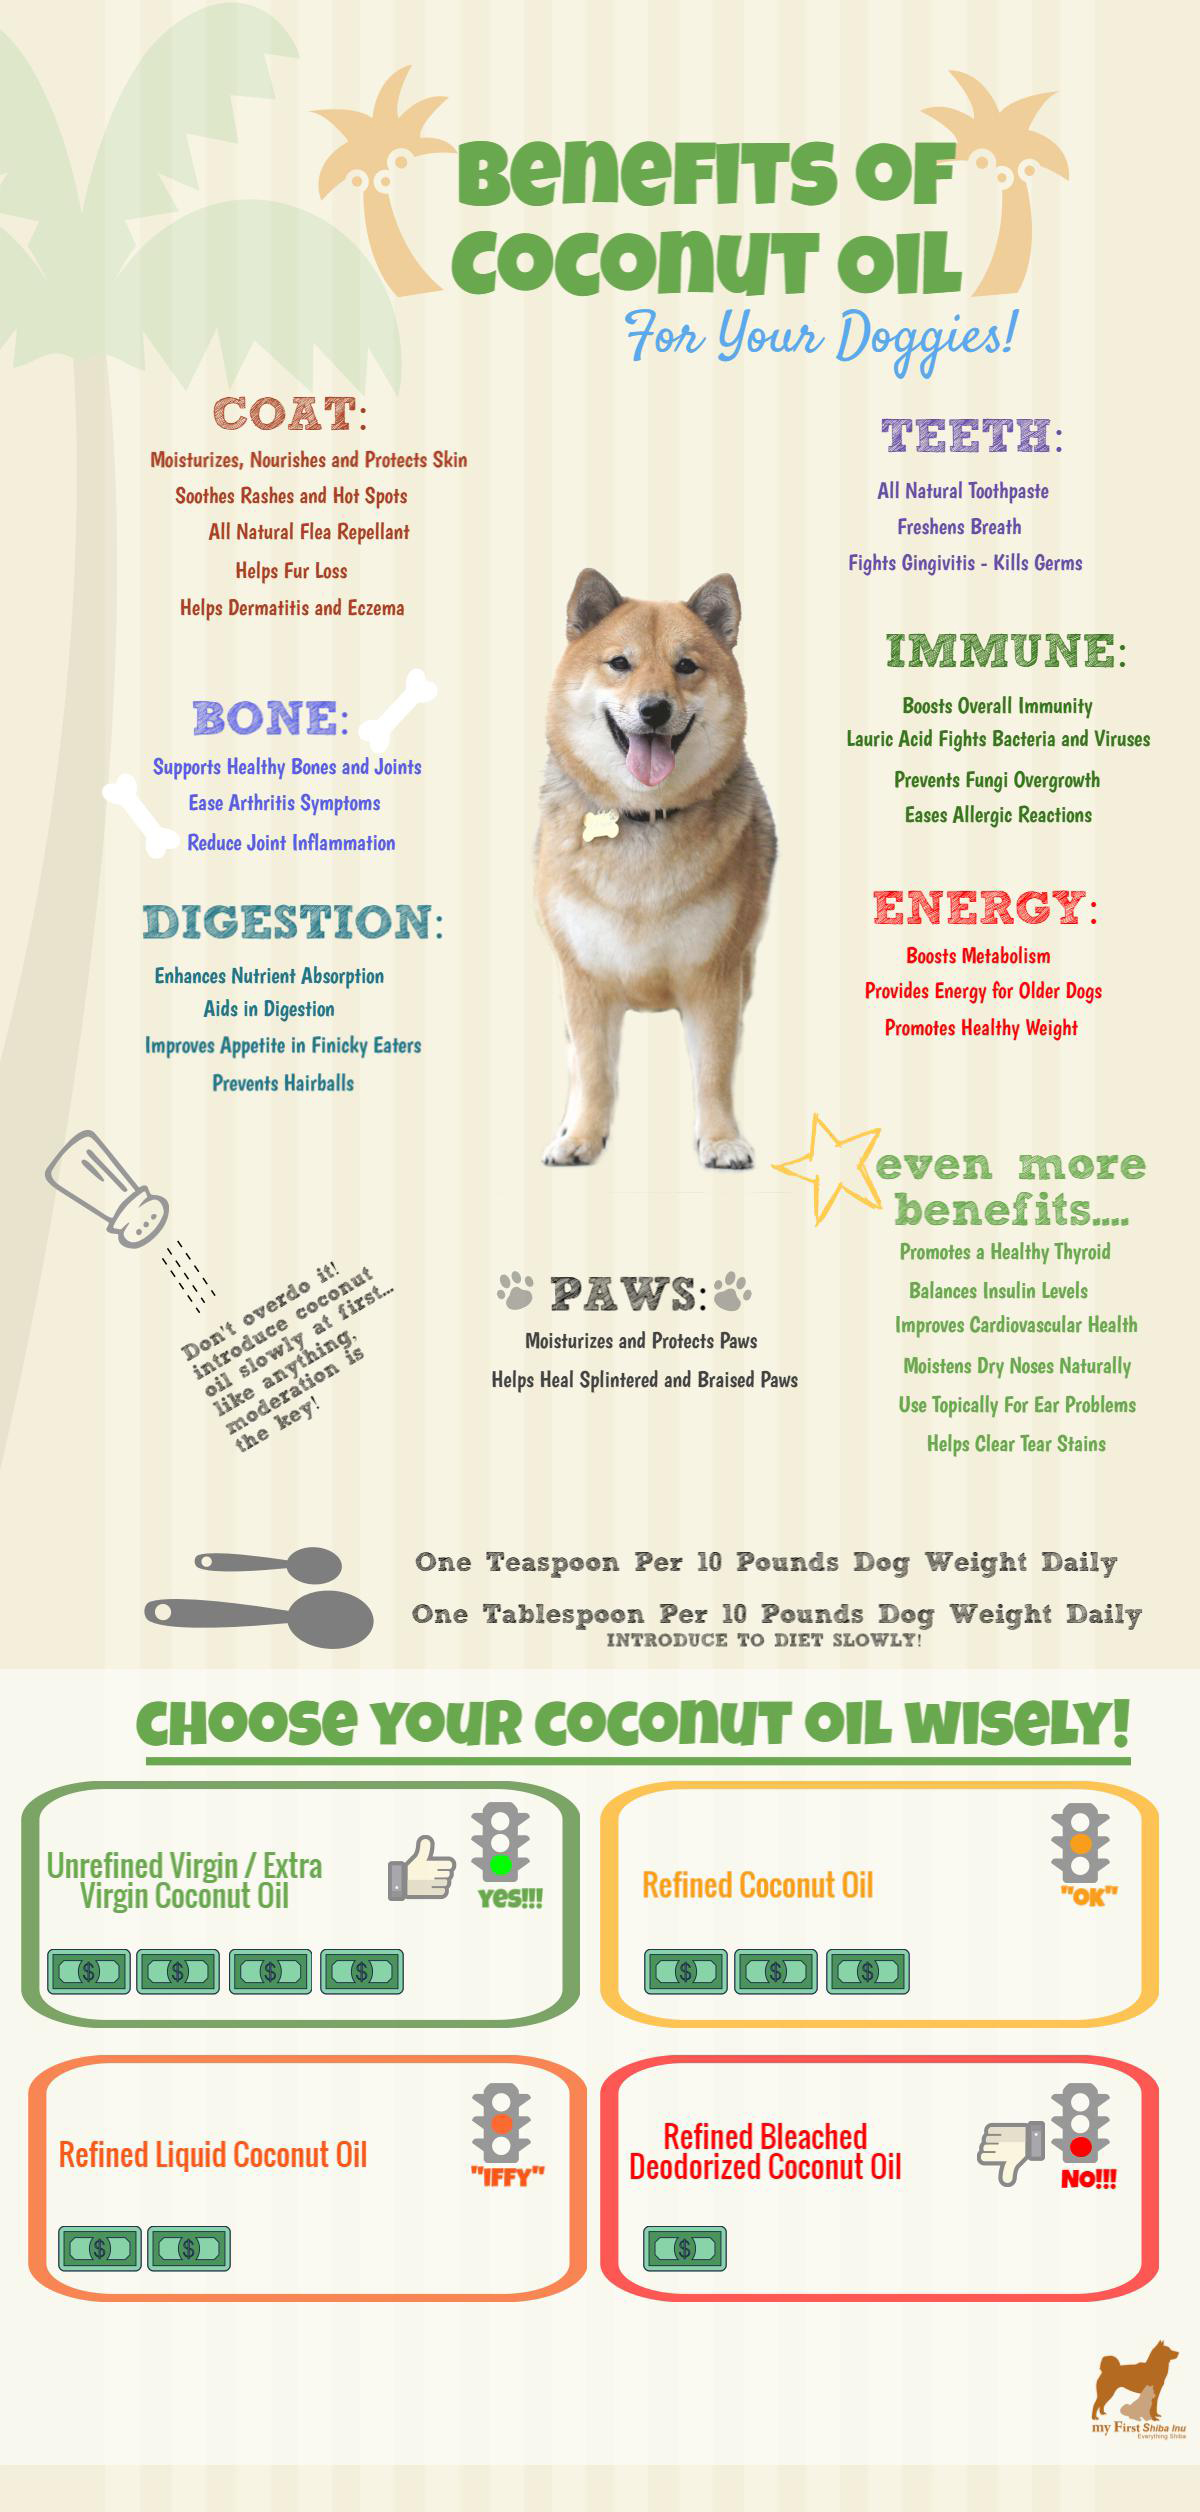 How Does Coconut Oil Help Dogs